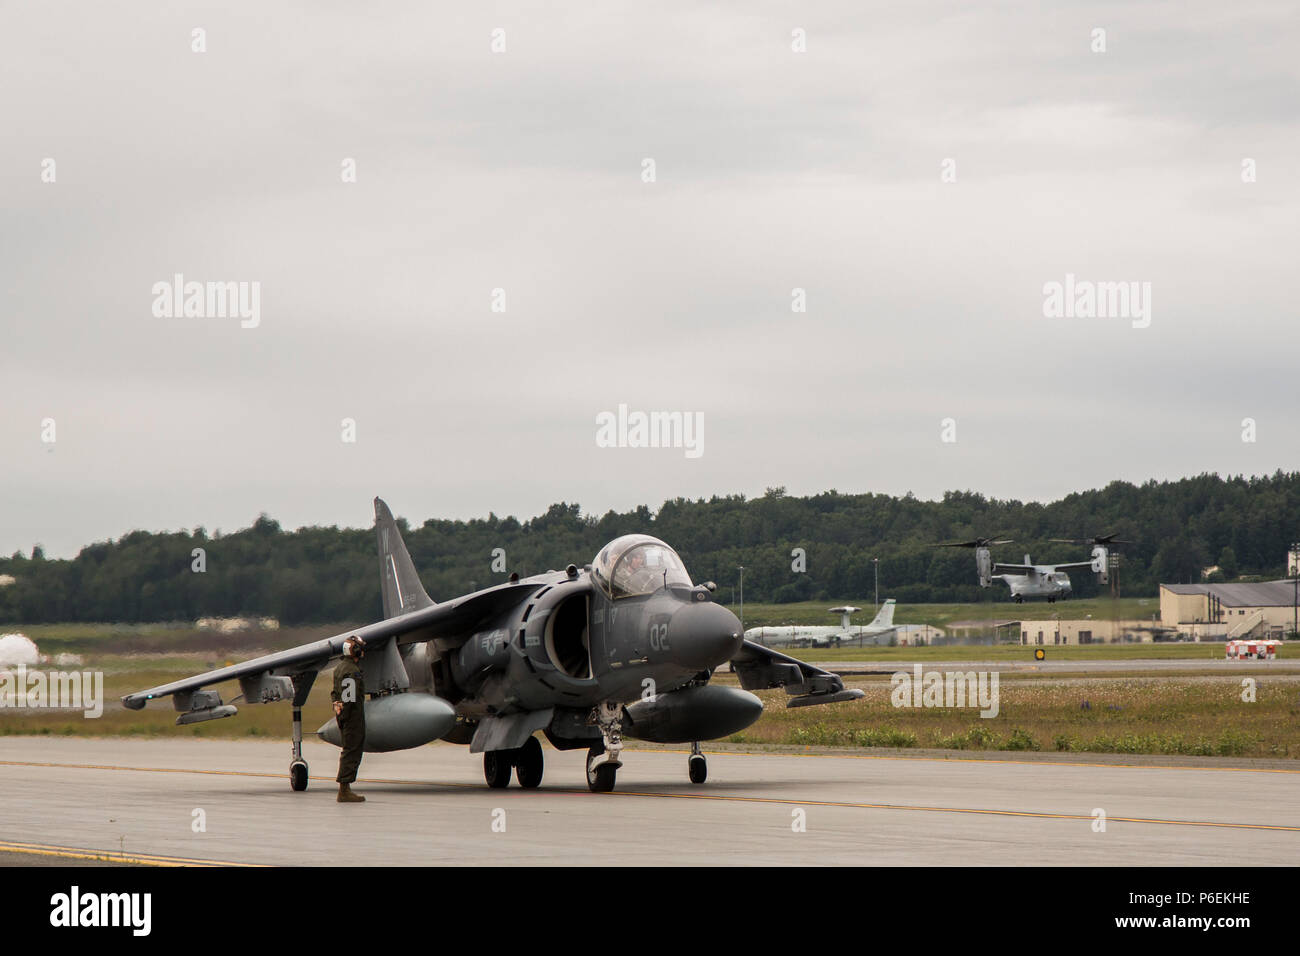 Marine Attack Squadron (VMA) 214 AV-8B Harriers arrive at Joint Base Elmendorf-Richardson, Alaska, June 27, 2018. VMA-214 will participate in the 2018 Arctic Thunder Air Show with a flyby, hover demonstration, and a static display. (U.S. Marine Corps photo by Lance Cpl. Sabrina Candiaflores) Stock Photo